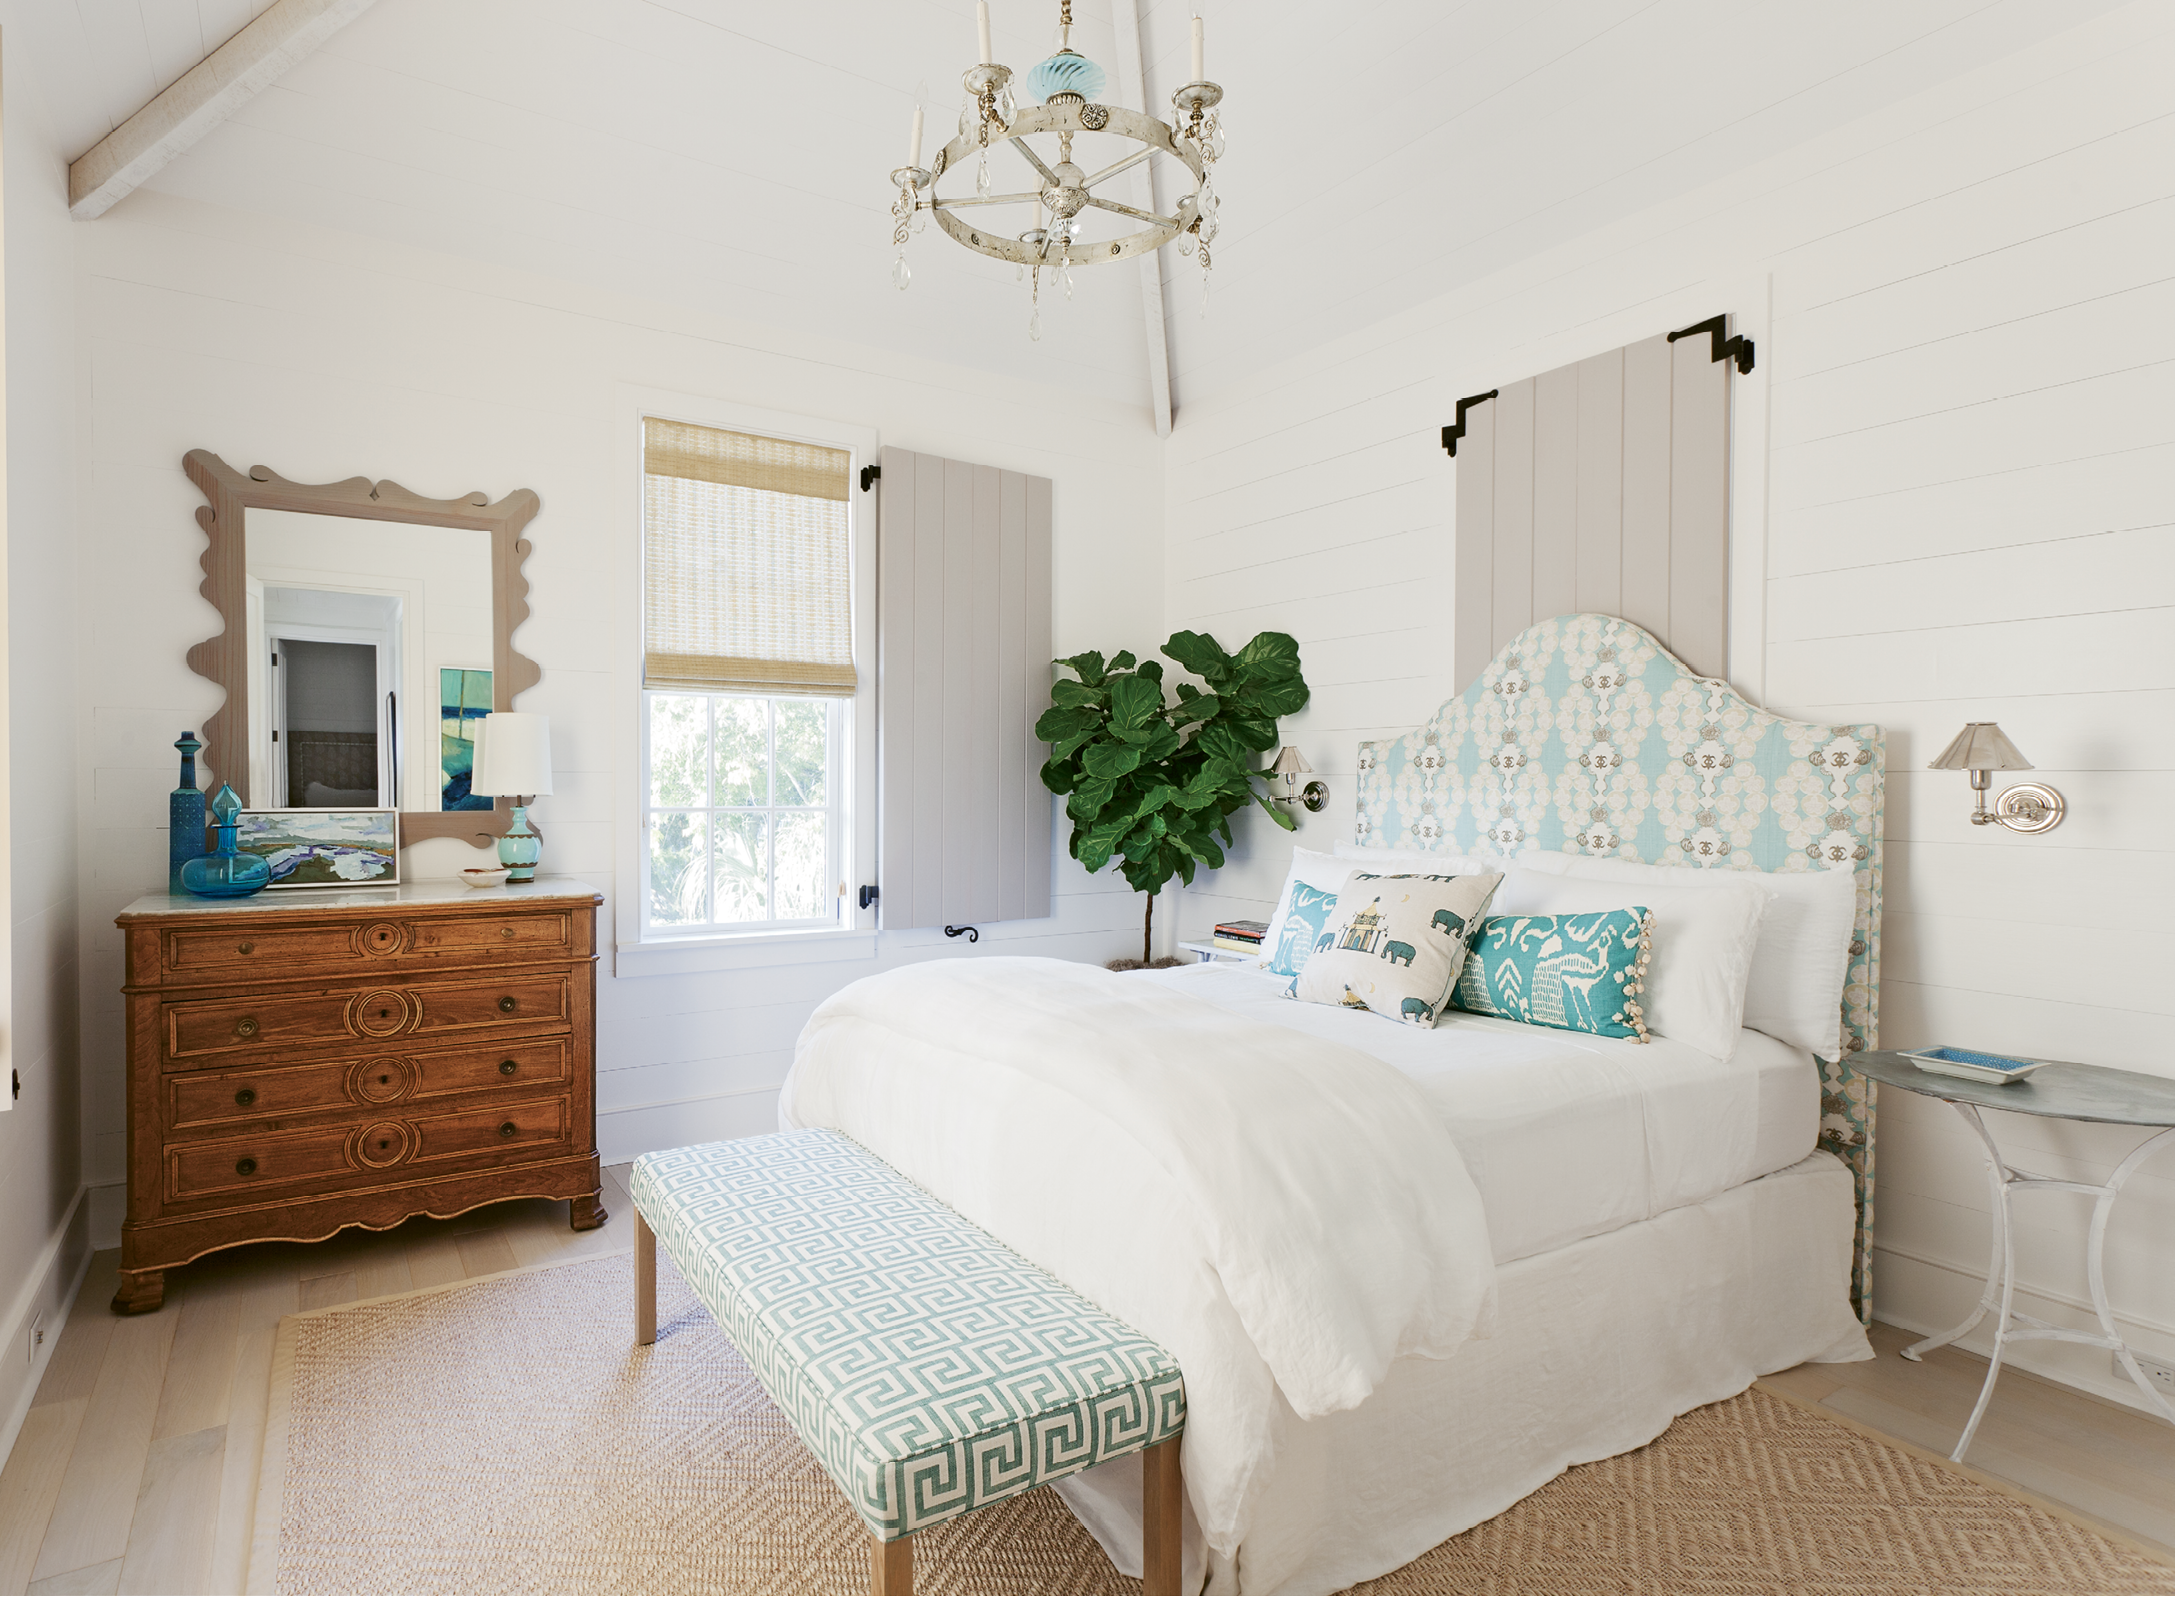 A guest bedroom, outfitted with dreamy creams and blues, proves that comfort and style can come in smaller sizes.